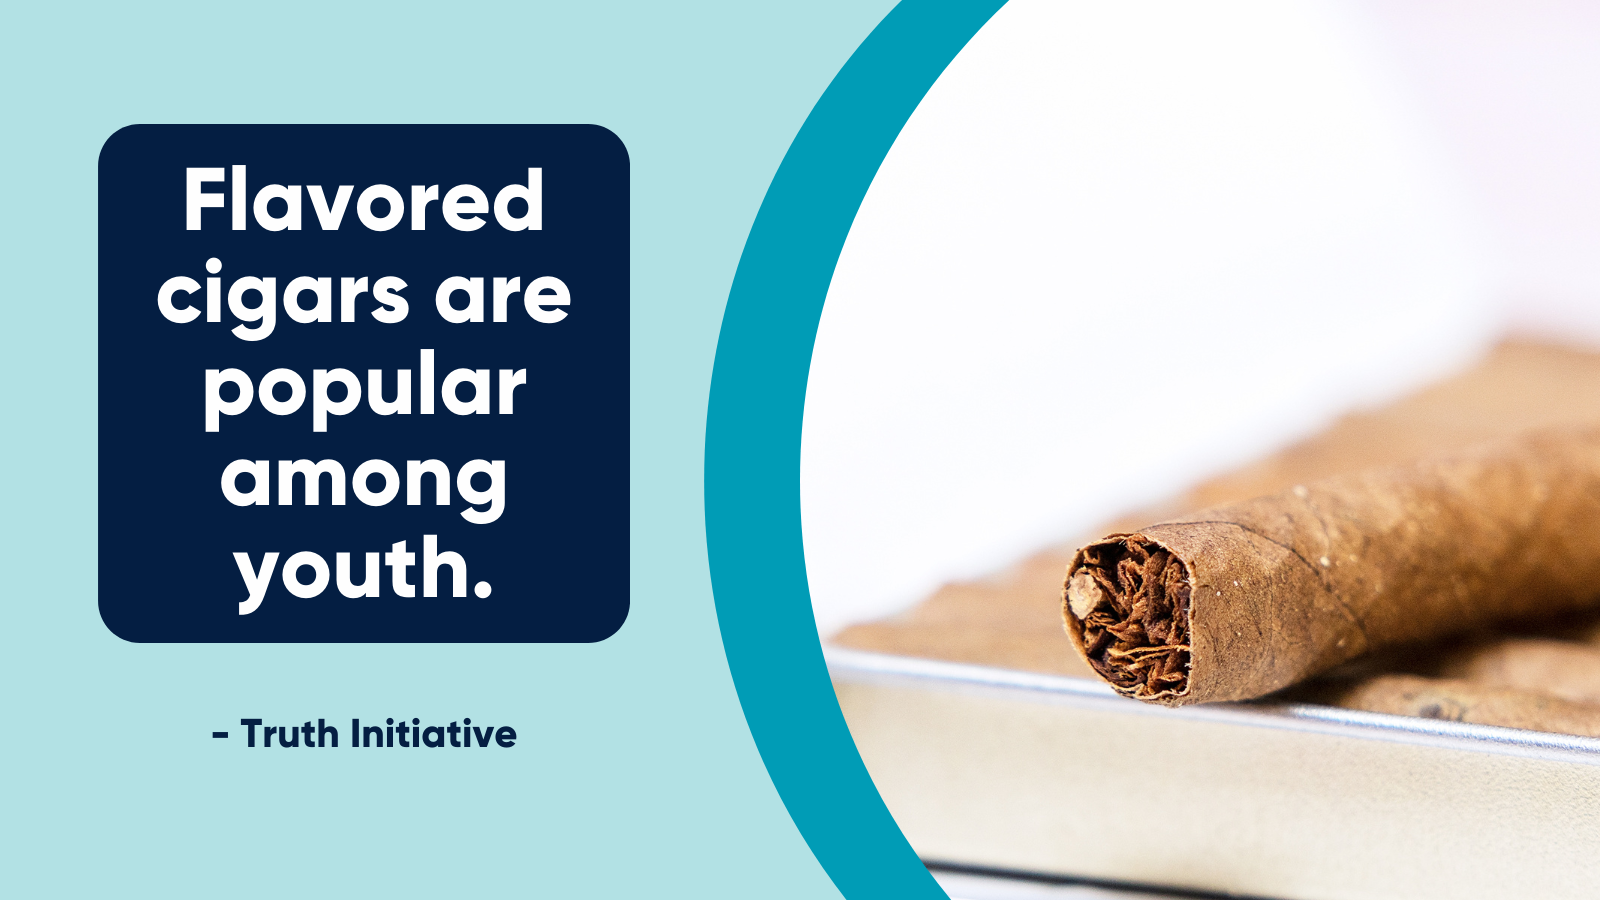 "Flavored cigars are popular among youth." Truth Initiative